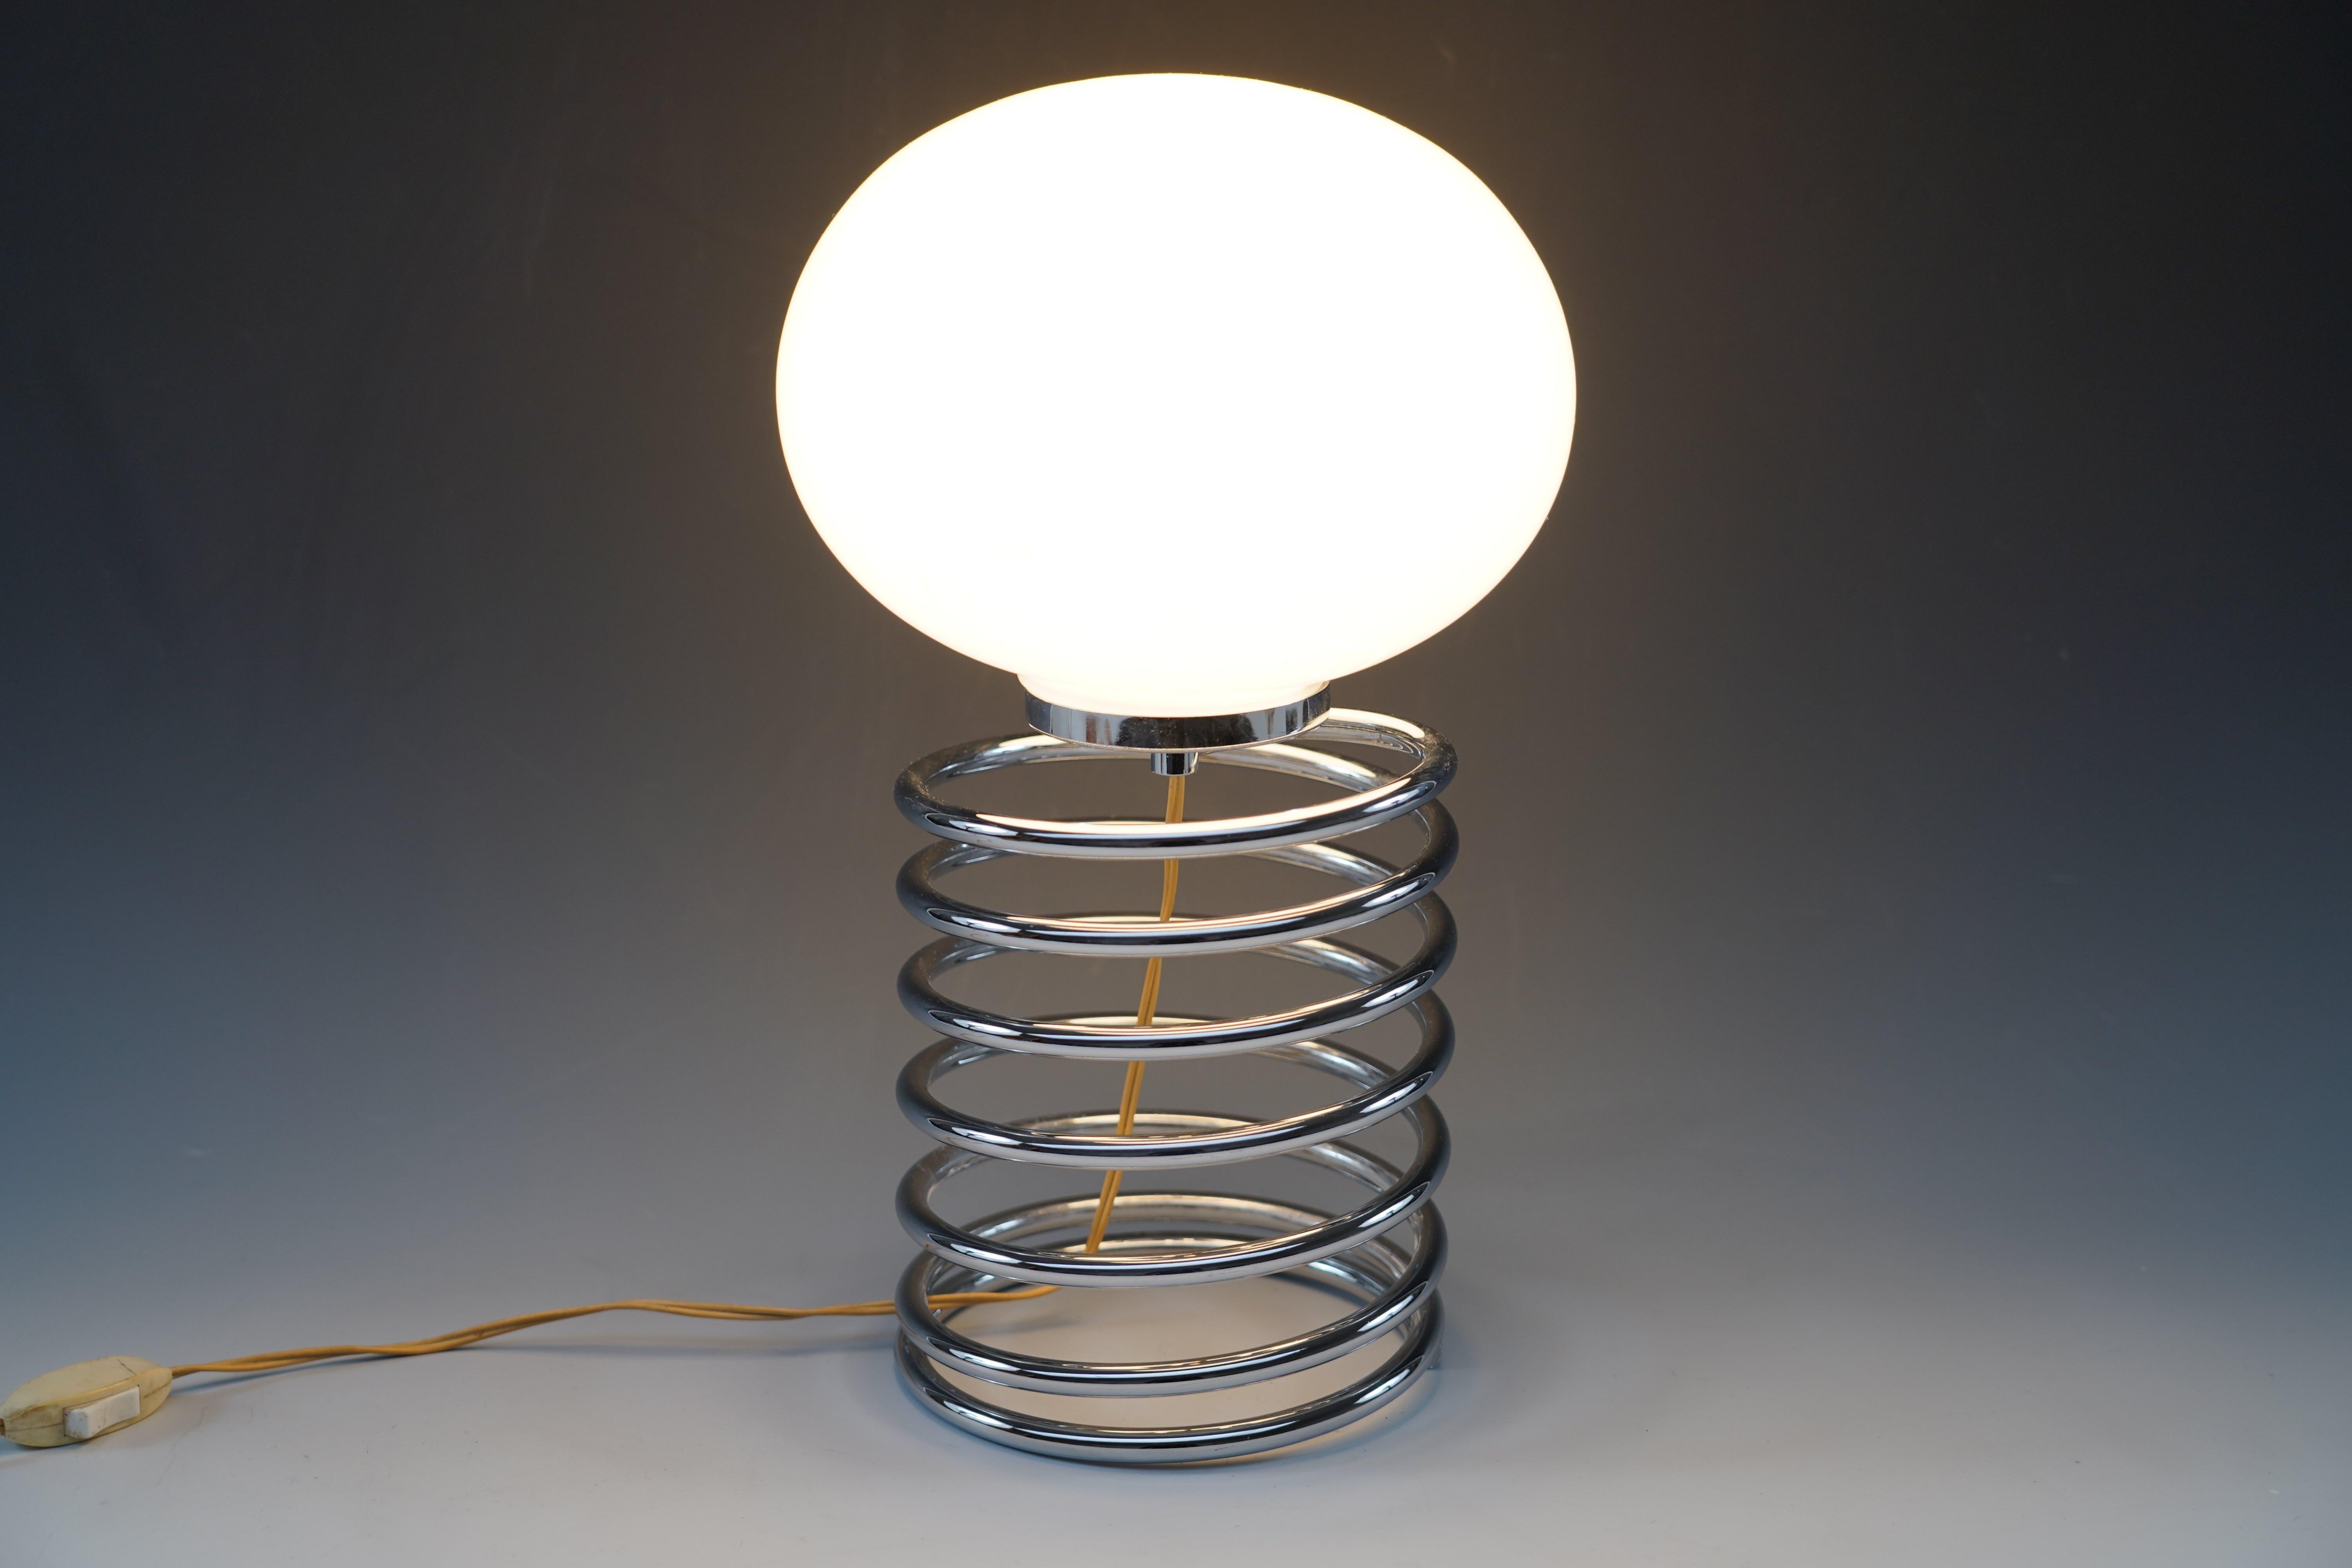 Beautiful “Spiral” model lamp typical of the 1960s attributed to the designer Ingo Maurer for Design M, chrome metal base and white opaline glass globe.

Biography :
Born in 1932 in Germany, on the island of Reichenau on Lake Constance, Ingo Maurer